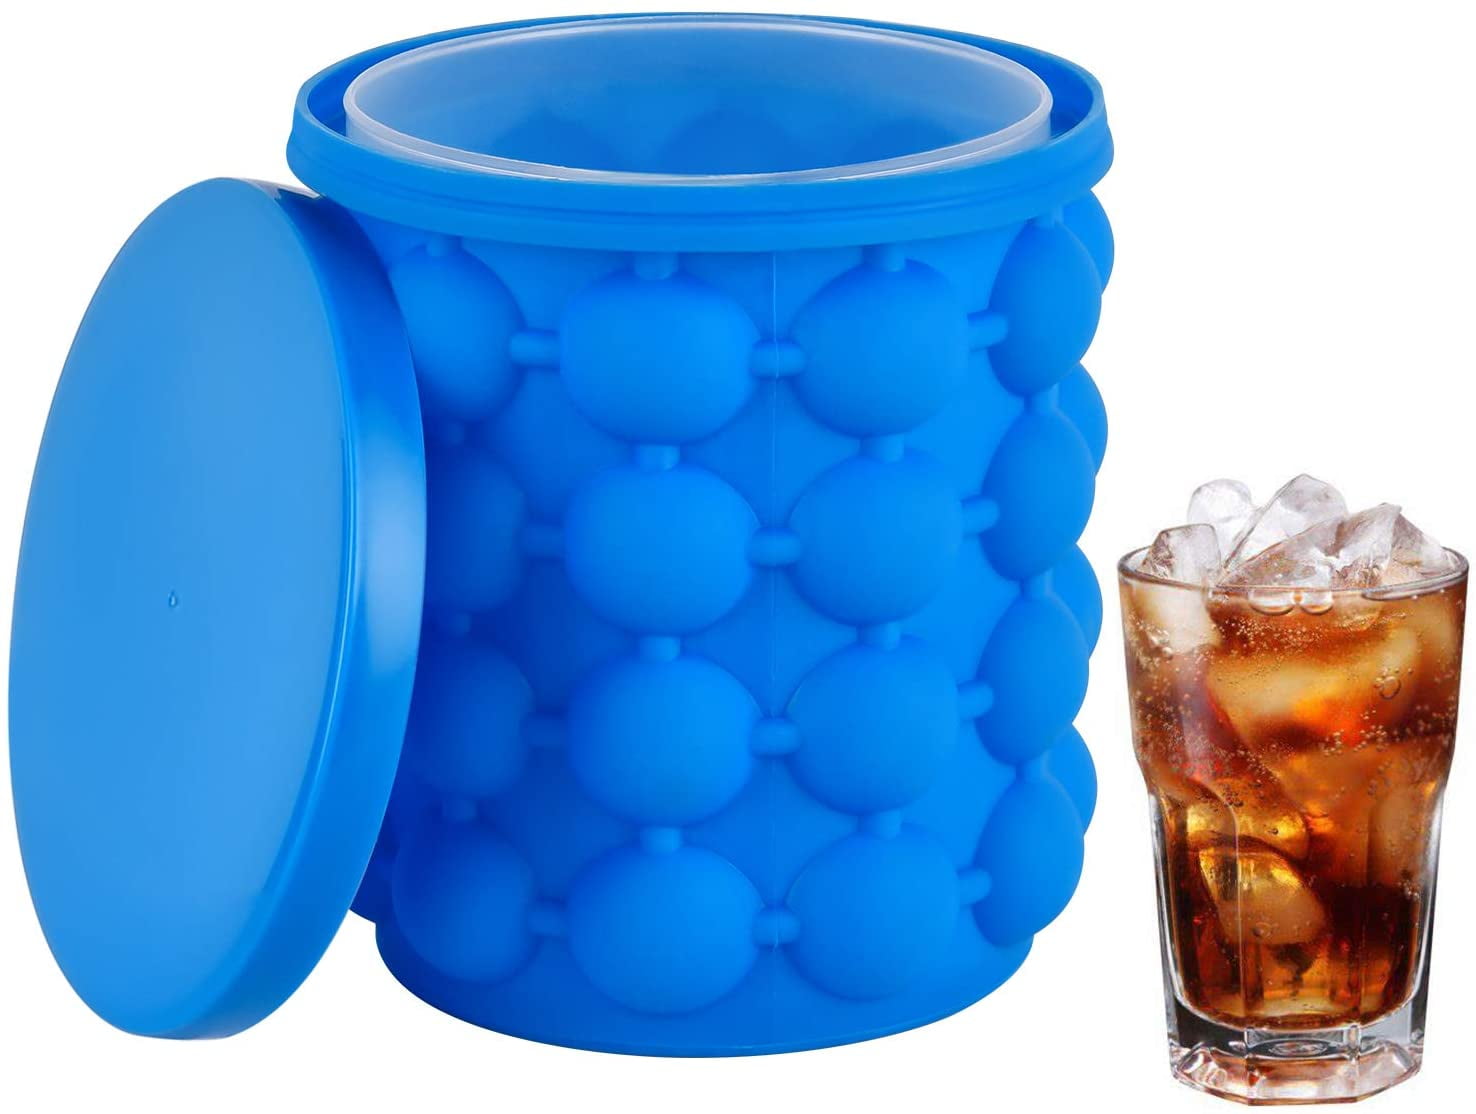 Large 2 in 1 Silicone Ice Bucket Ice Cube Maker Genie Mold With Lid Space  Saving Crushed Ice Tray Mold Wine Chilling Bucket Tool